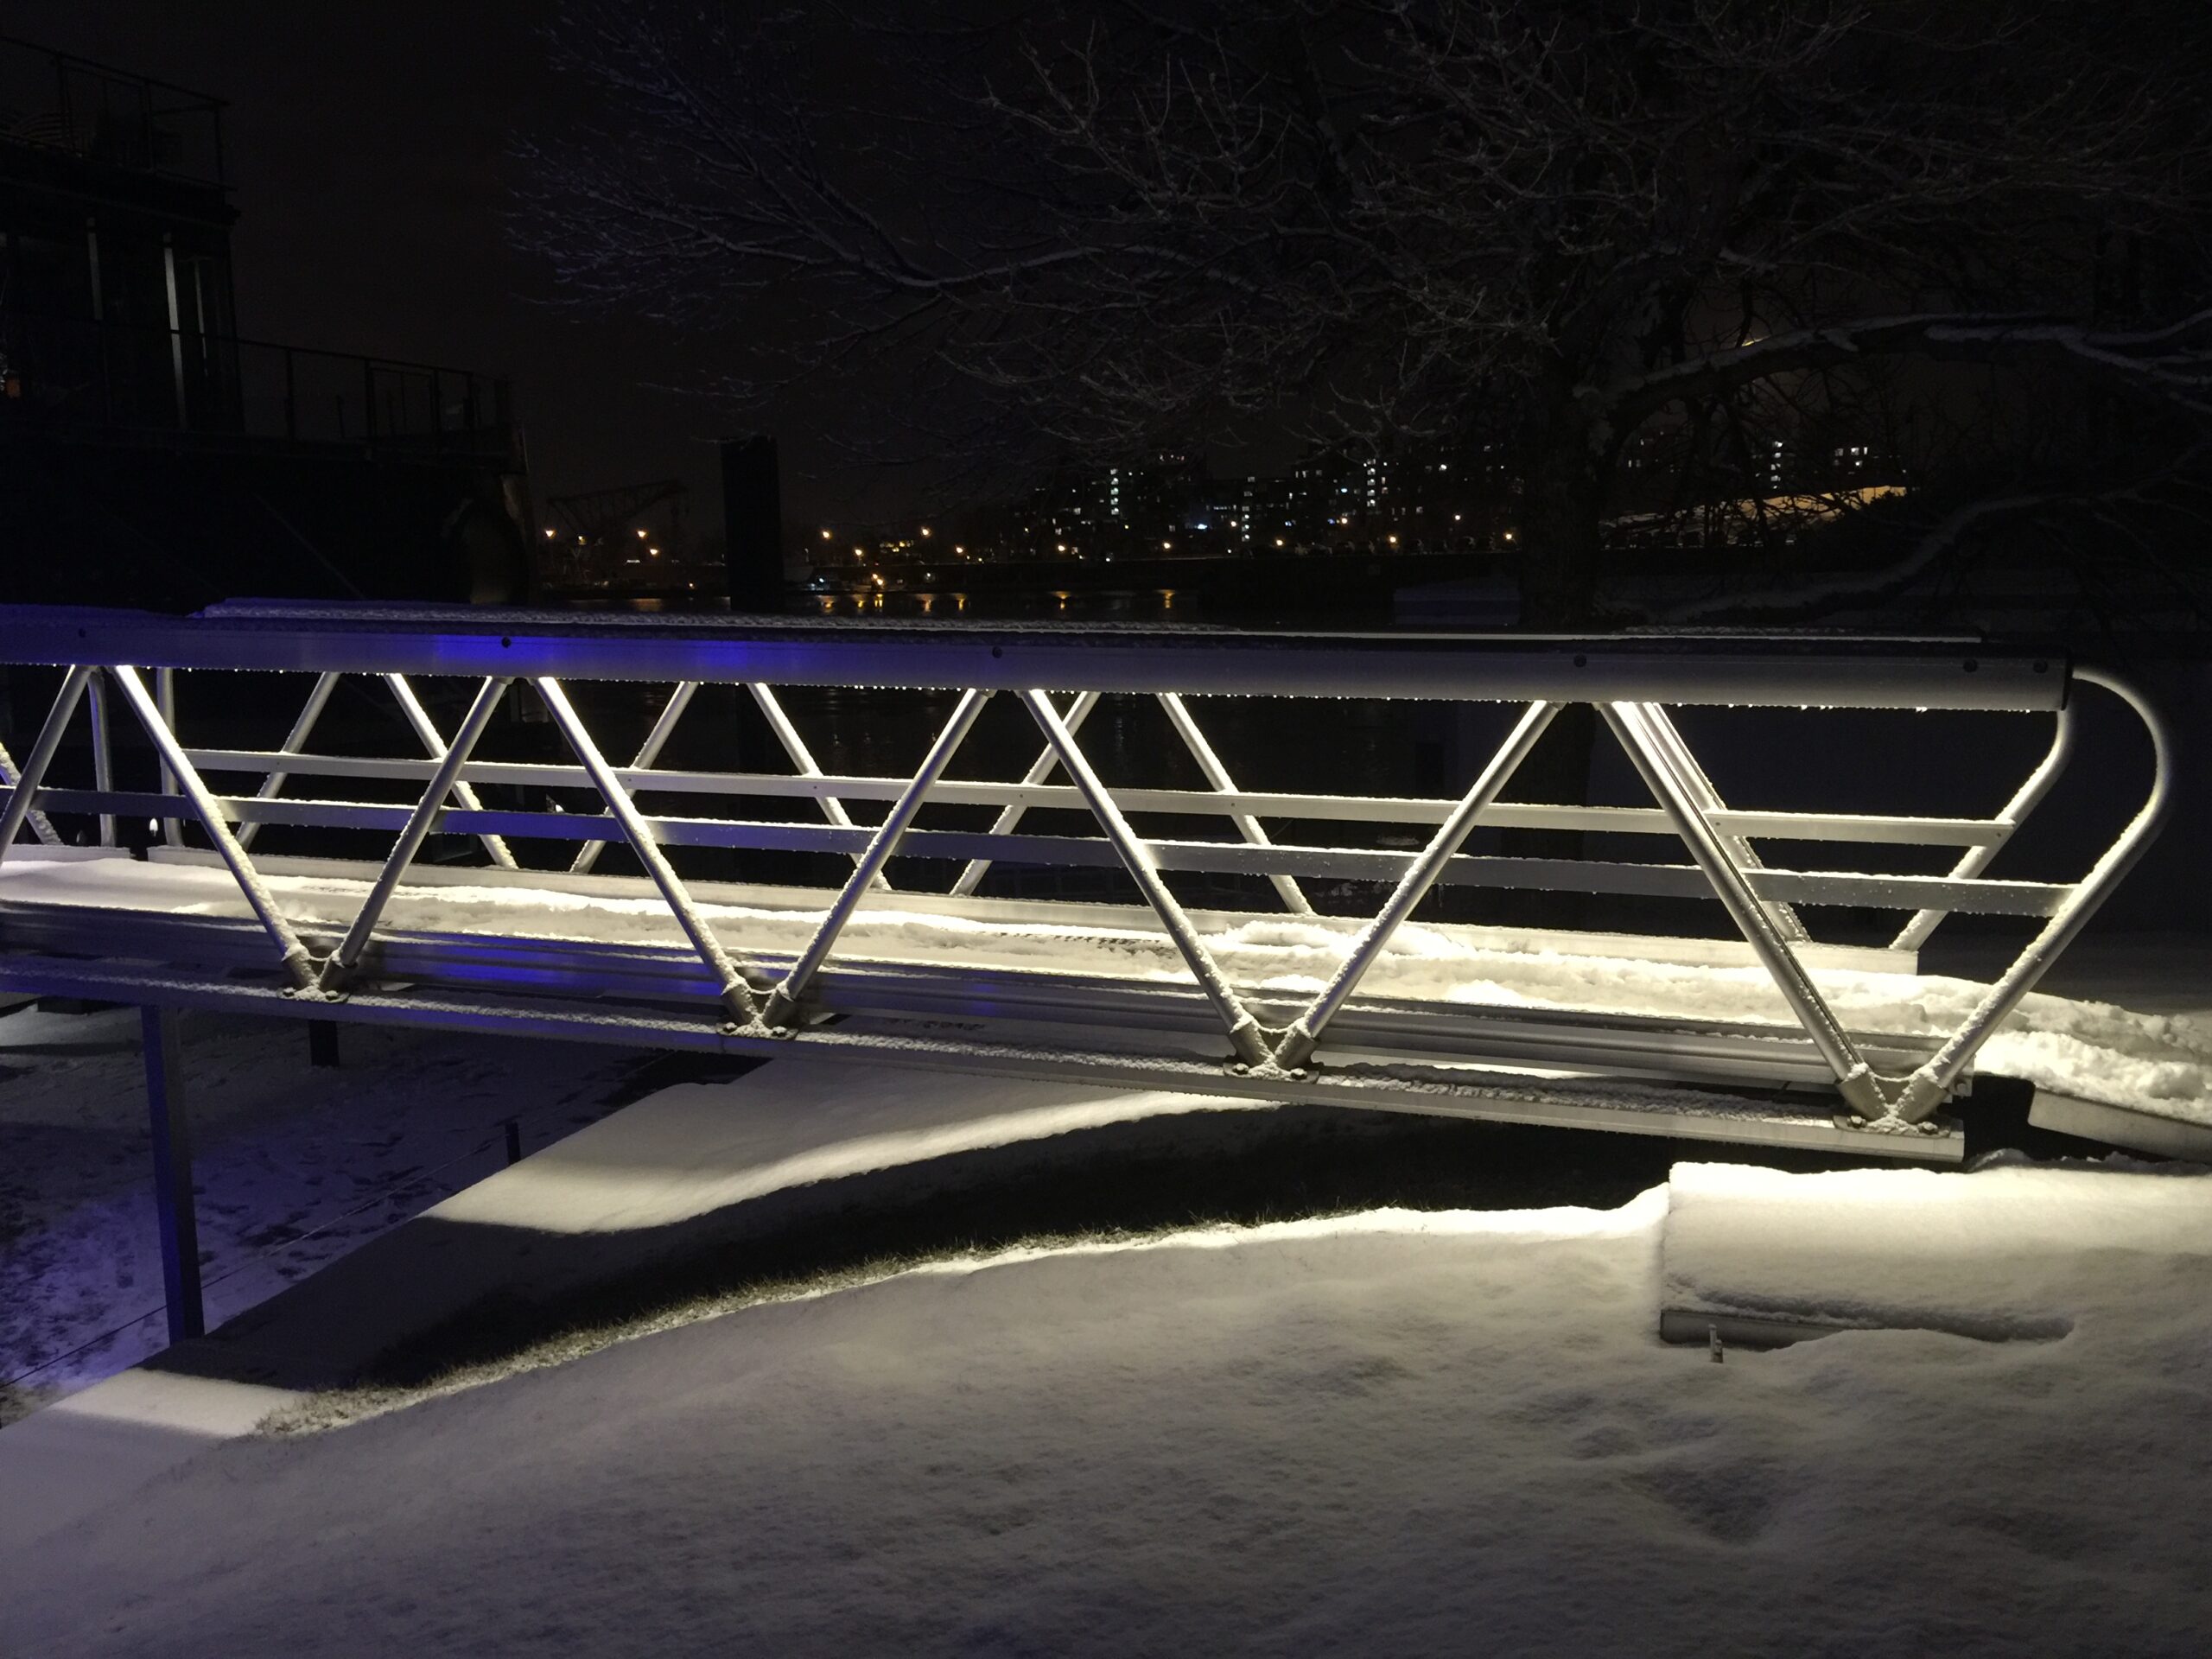 Aluminum gangway in snowy urban setting with built-in lighting